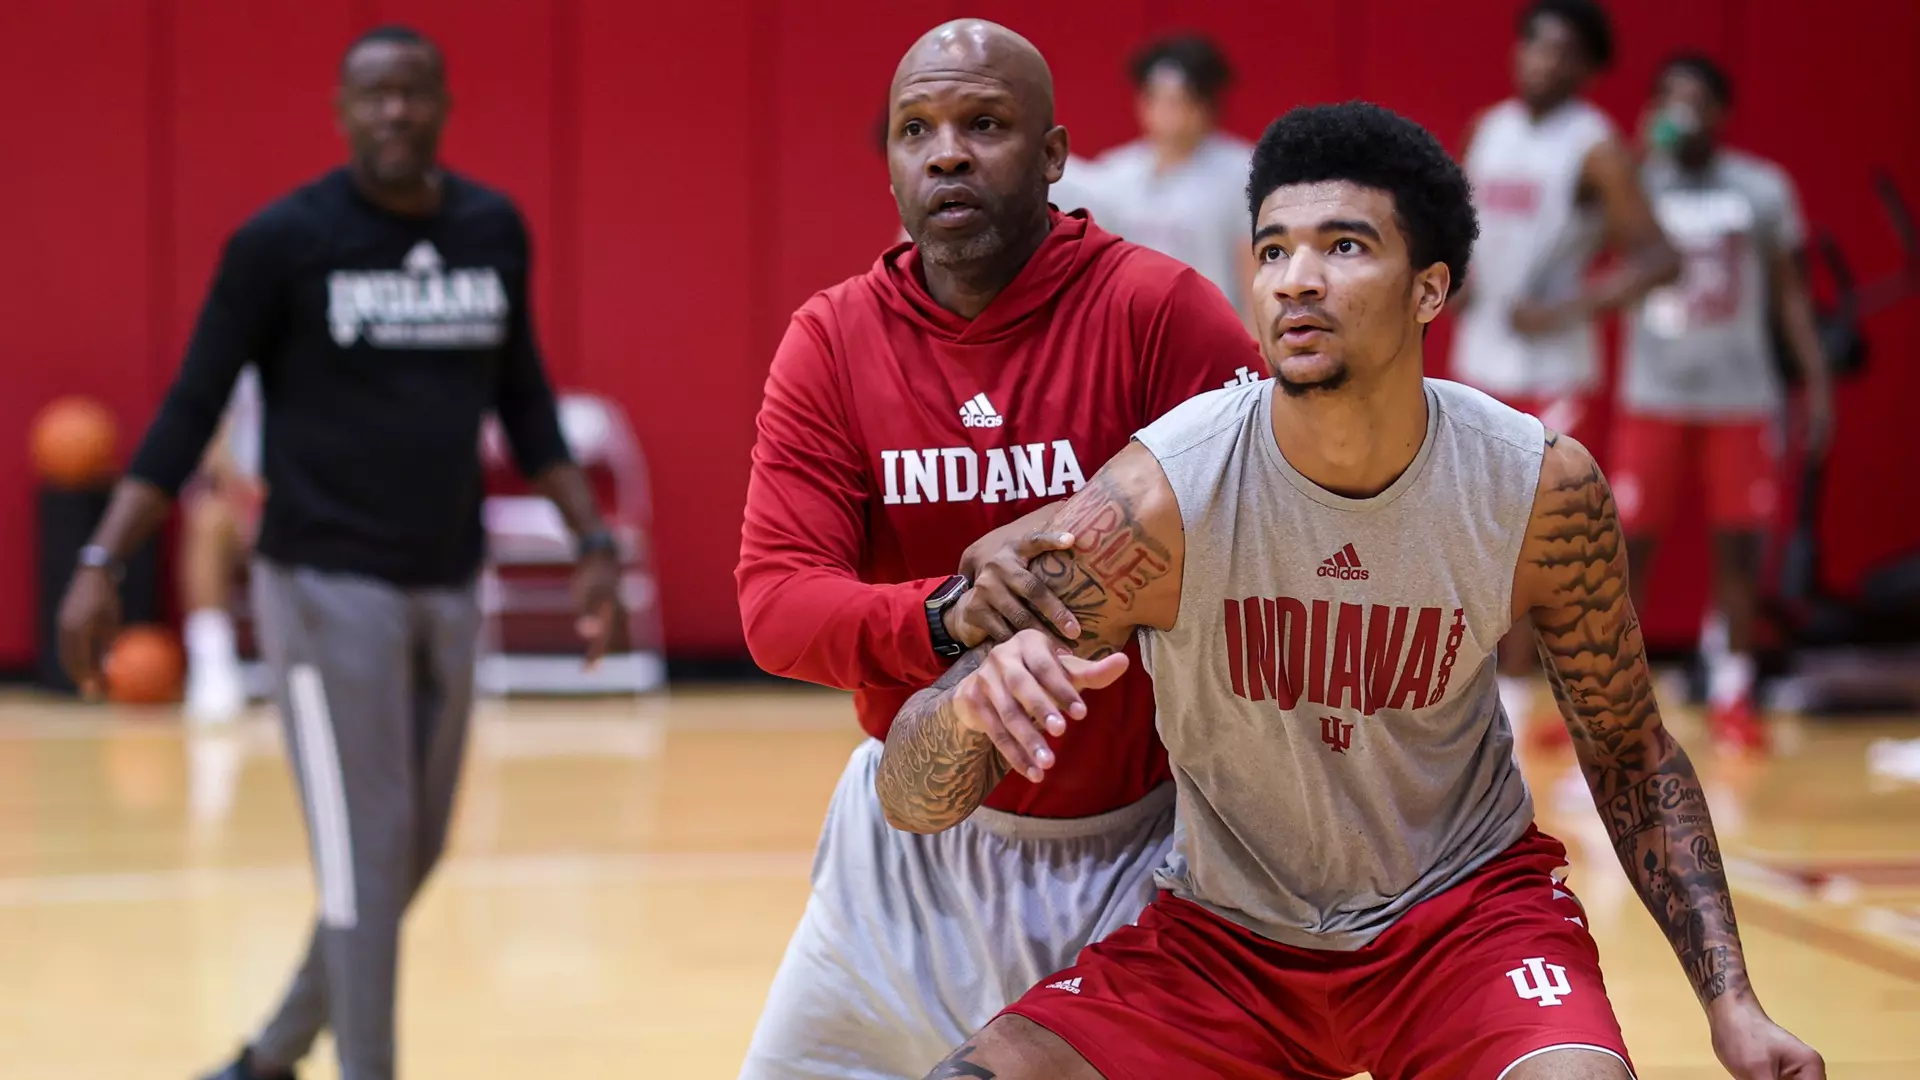 Kel'el Ware: 5 things to know about Indiana Hoosiers basketball commit